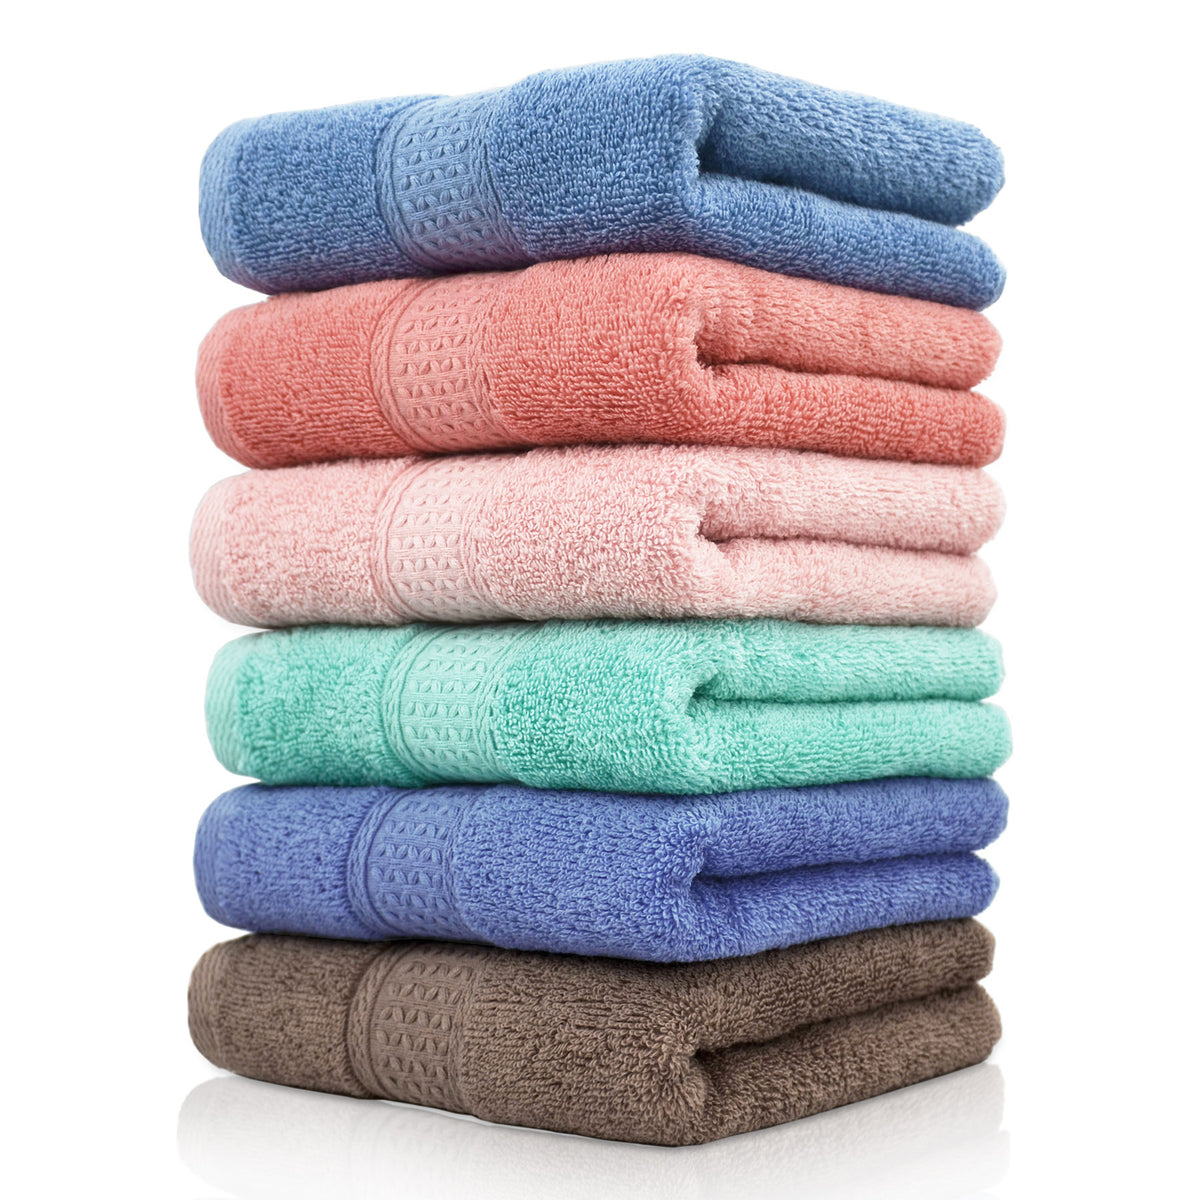 Cleanbear Hand Towels for Bathroom Hand Towel Set of 6 in Assorted Colors,  Wavy Line Design for Bathroom Decoration, Soft and Fluffy Bathroom Hand